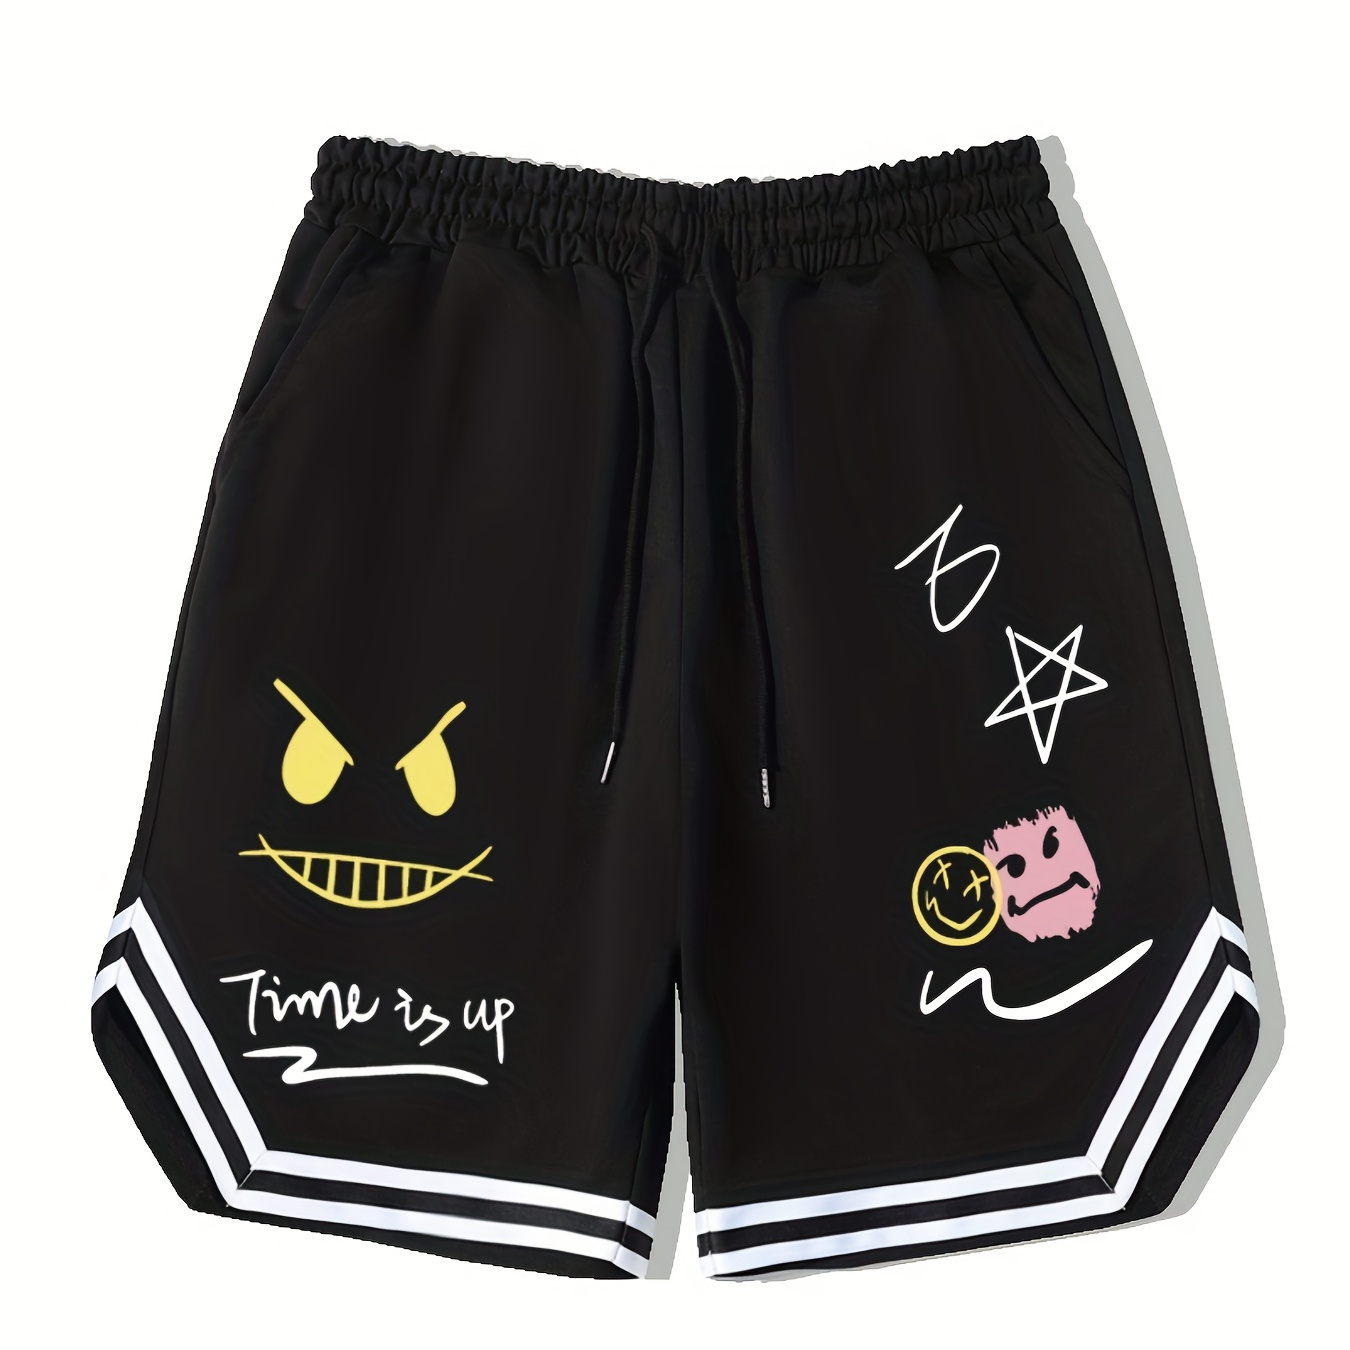 

Men's Streetwear Shorts, Graffiti Graphic Drawstring Stretchy Short Pants For Comfort & Casual Chic Style, Summer Clothings Men's Fashion Outfits